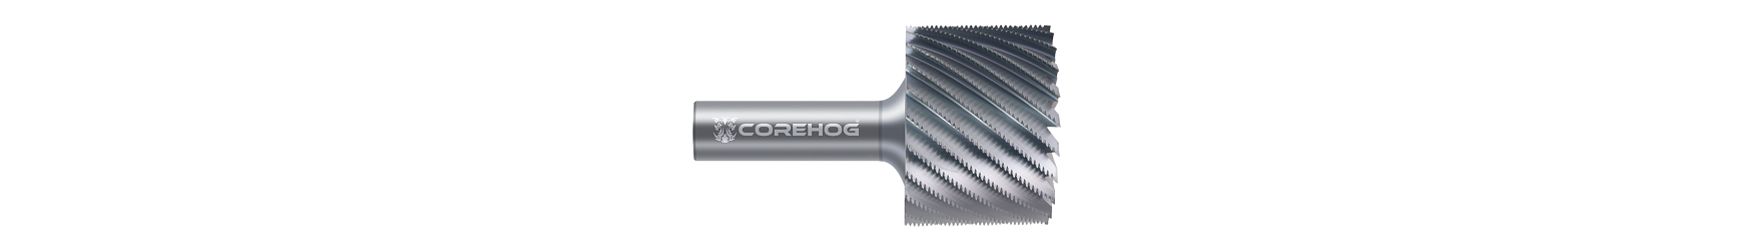 Honeycomb Core Roughing Tools-CoreHoggers-Flat End-Reduced Shank